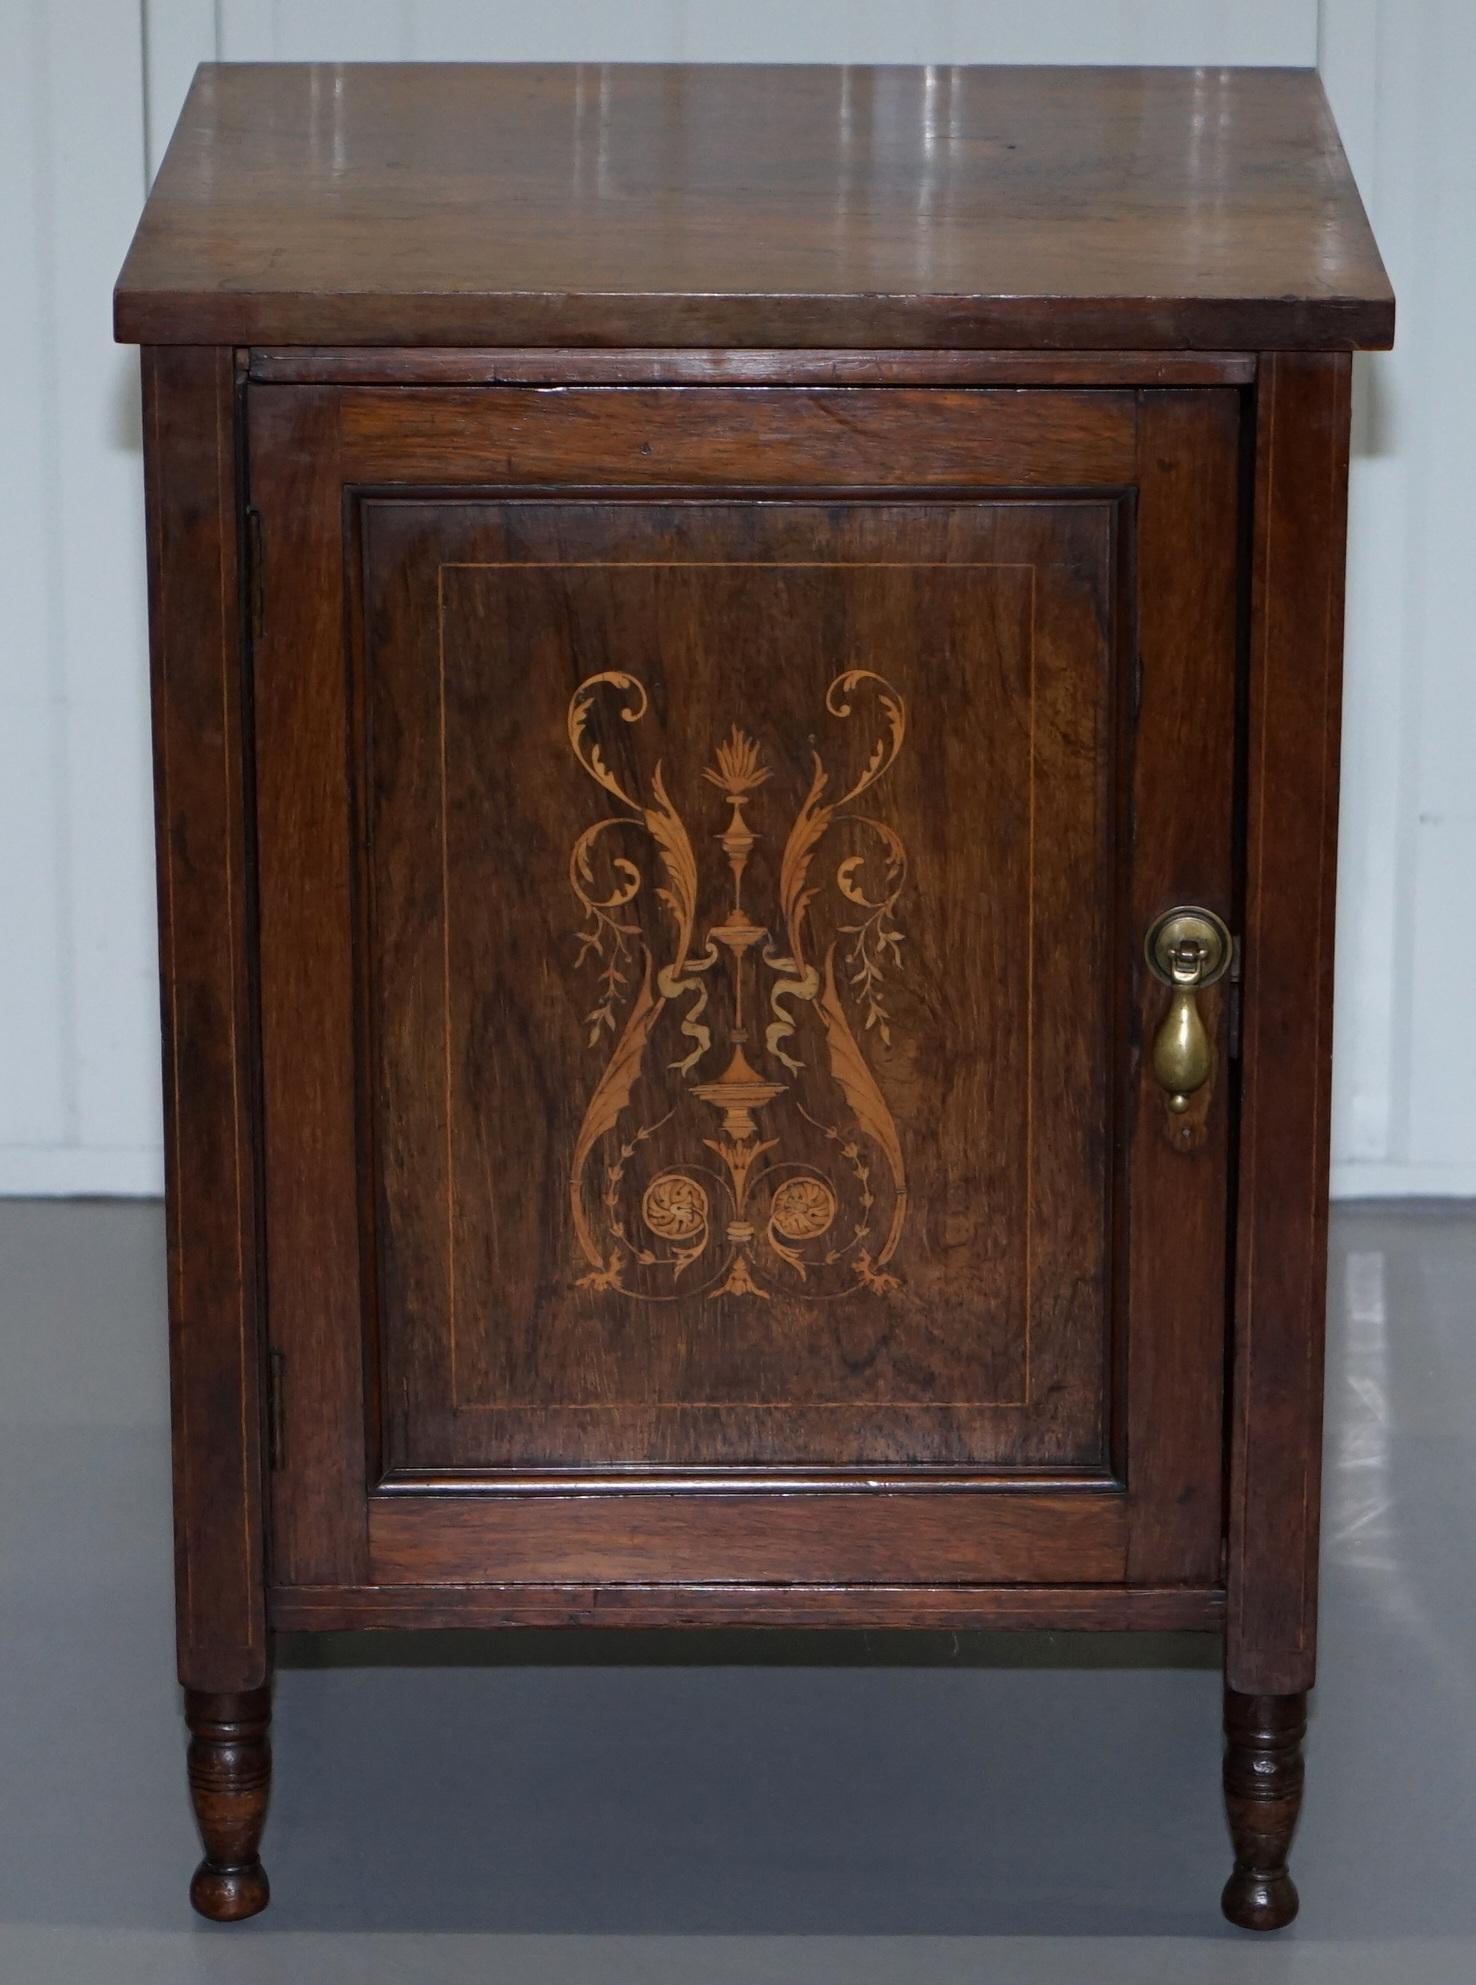 We are delighted to this stunning side table sized Victorian Rosewood Marquetry inlaid cabinet

A very good looking and well made versatile piece, ideally suited as a lamp or wine side table for the living room but can of course be used as a